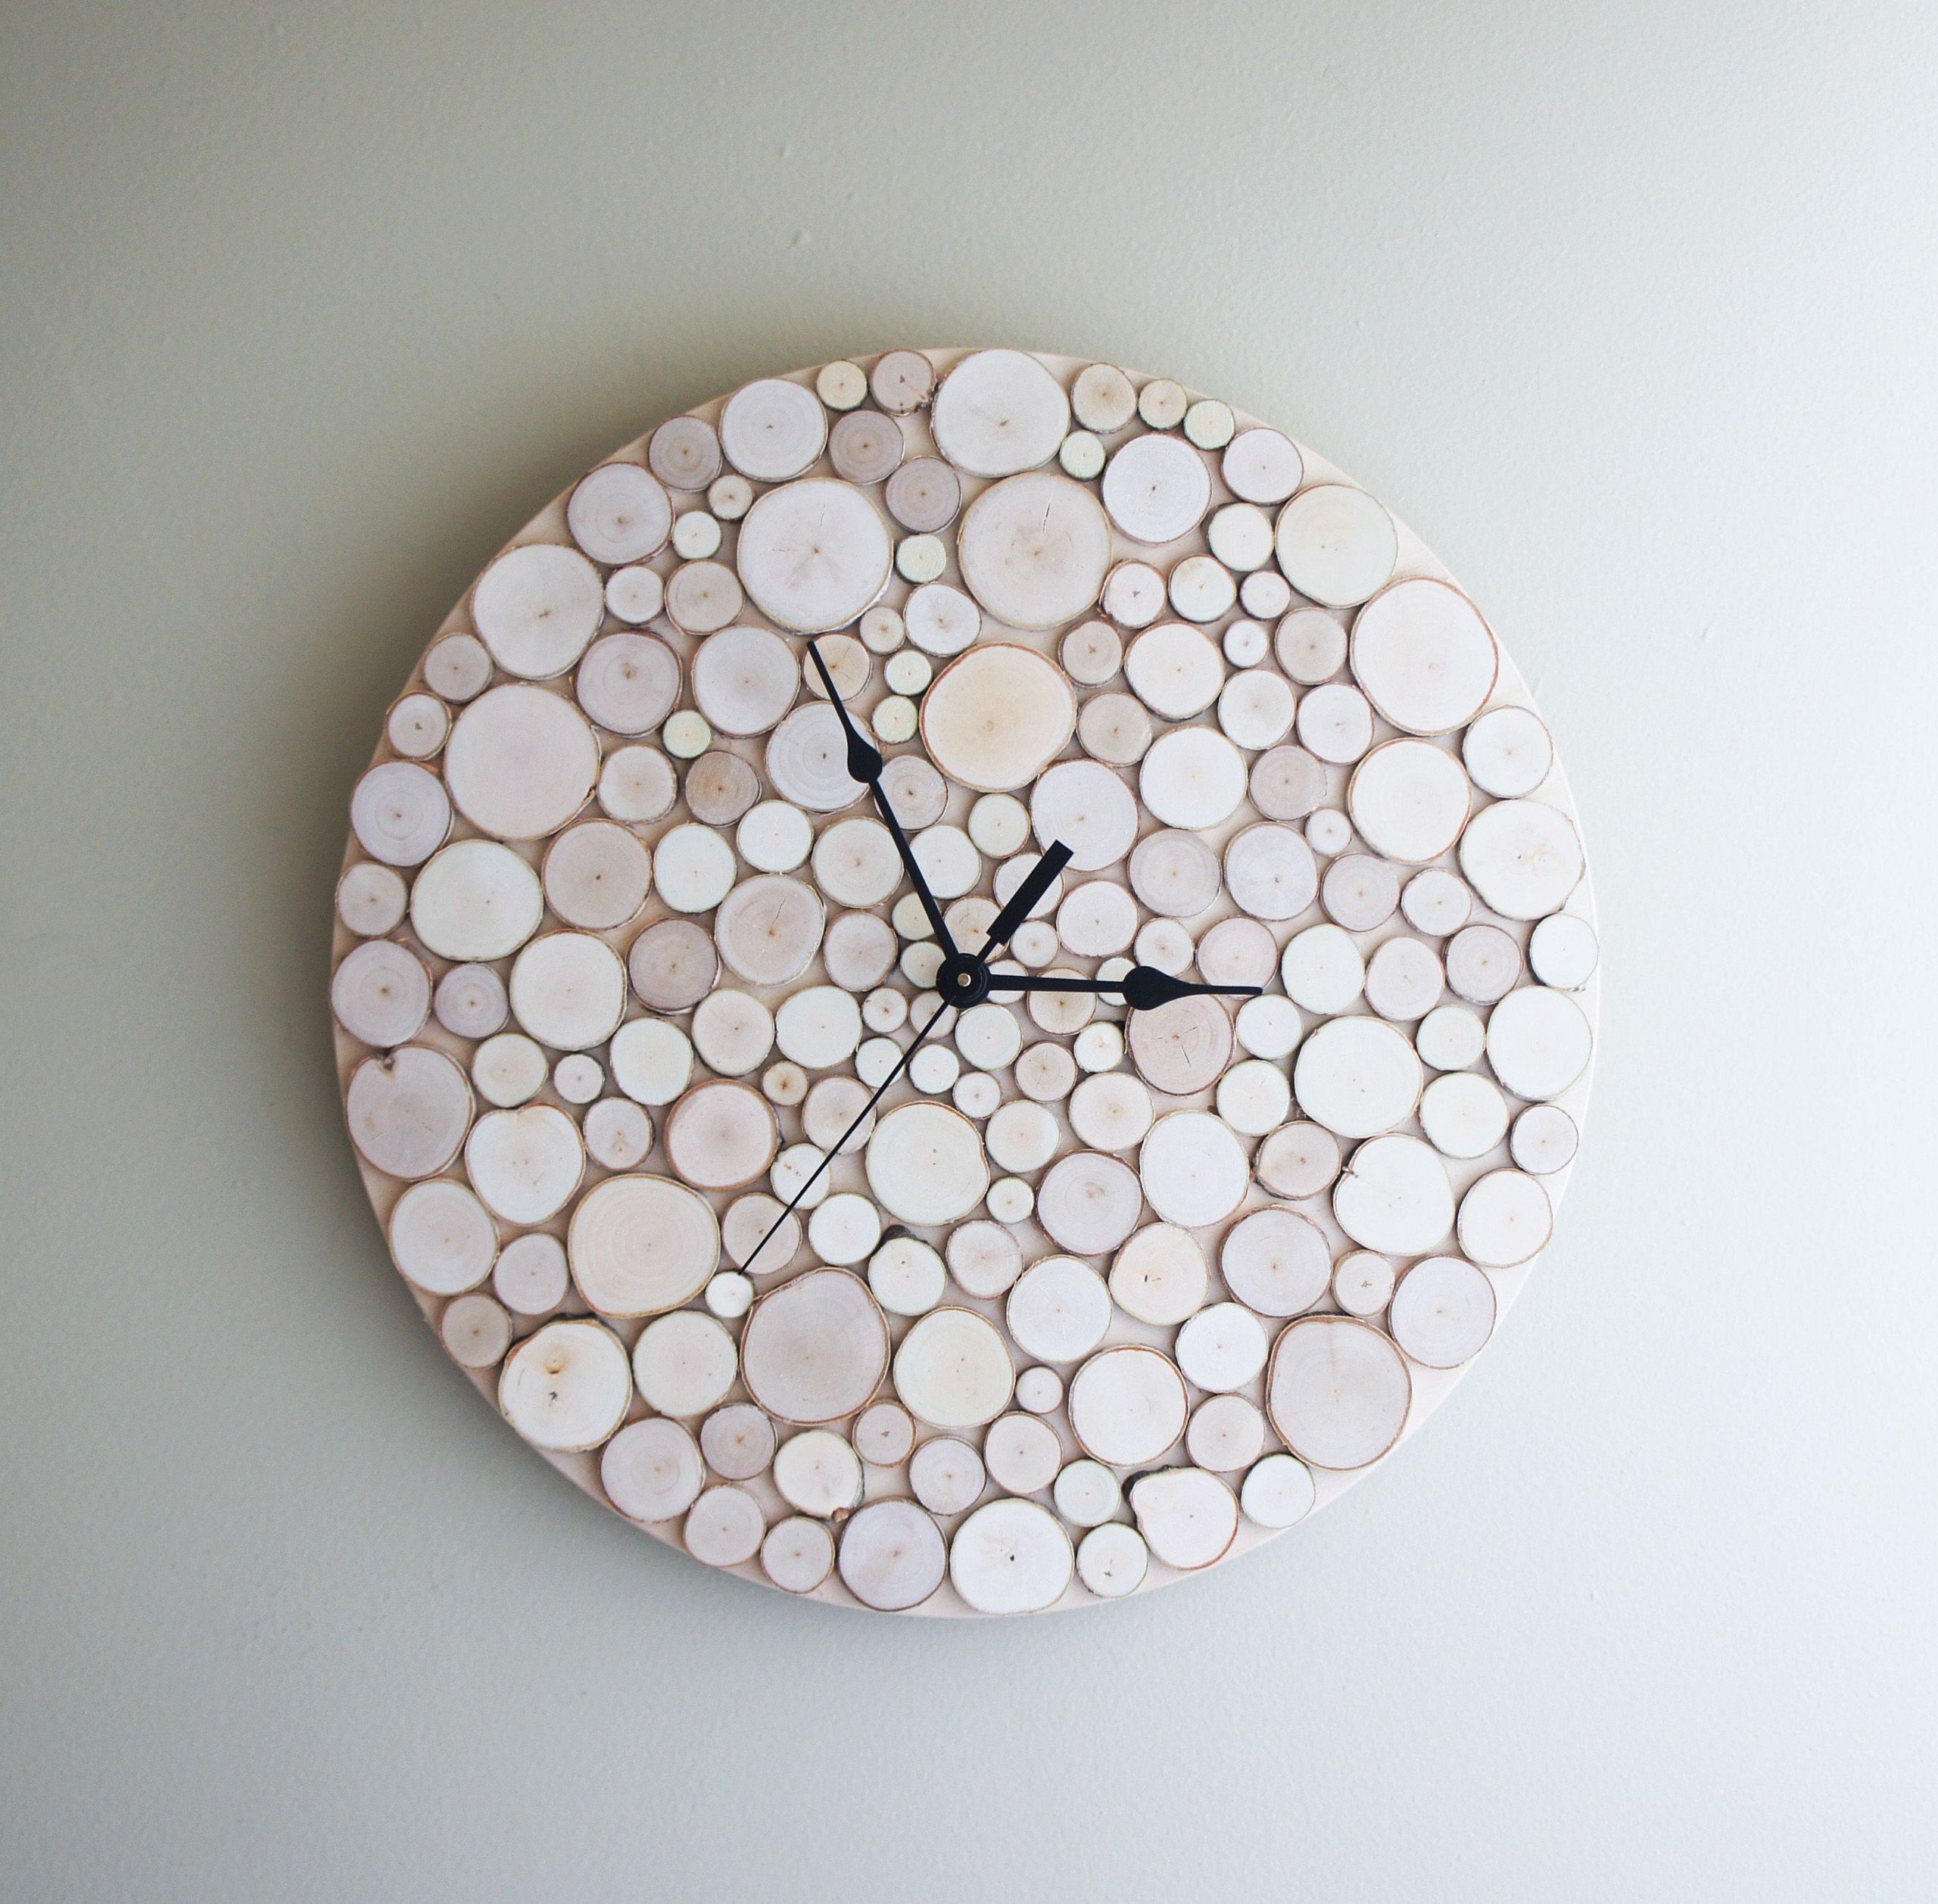 Large contemporary clocks for walls